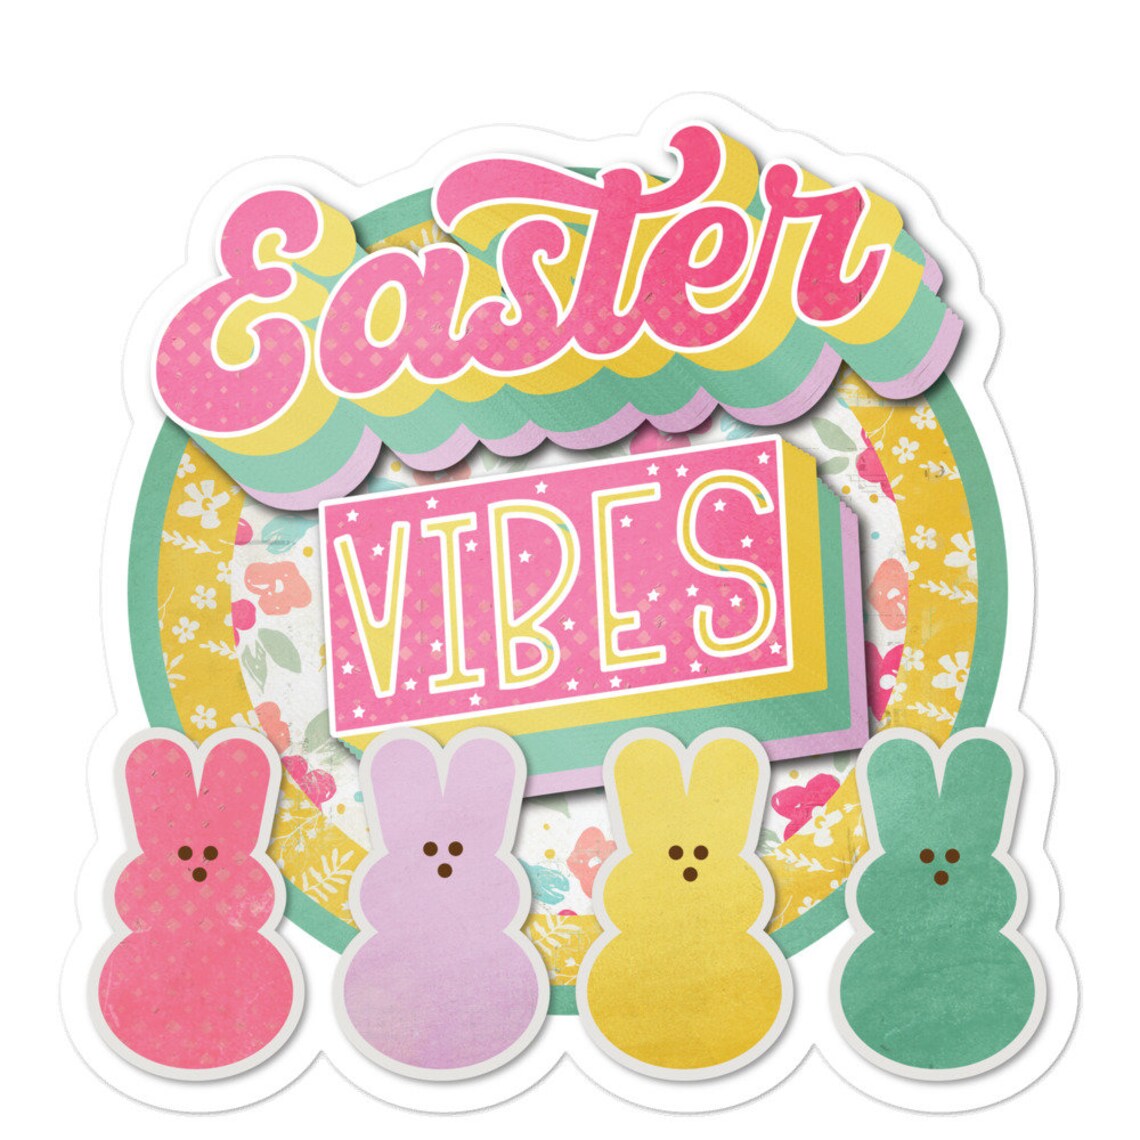 Easter Vibes Bunnies Bubble-free stickers | Etsy